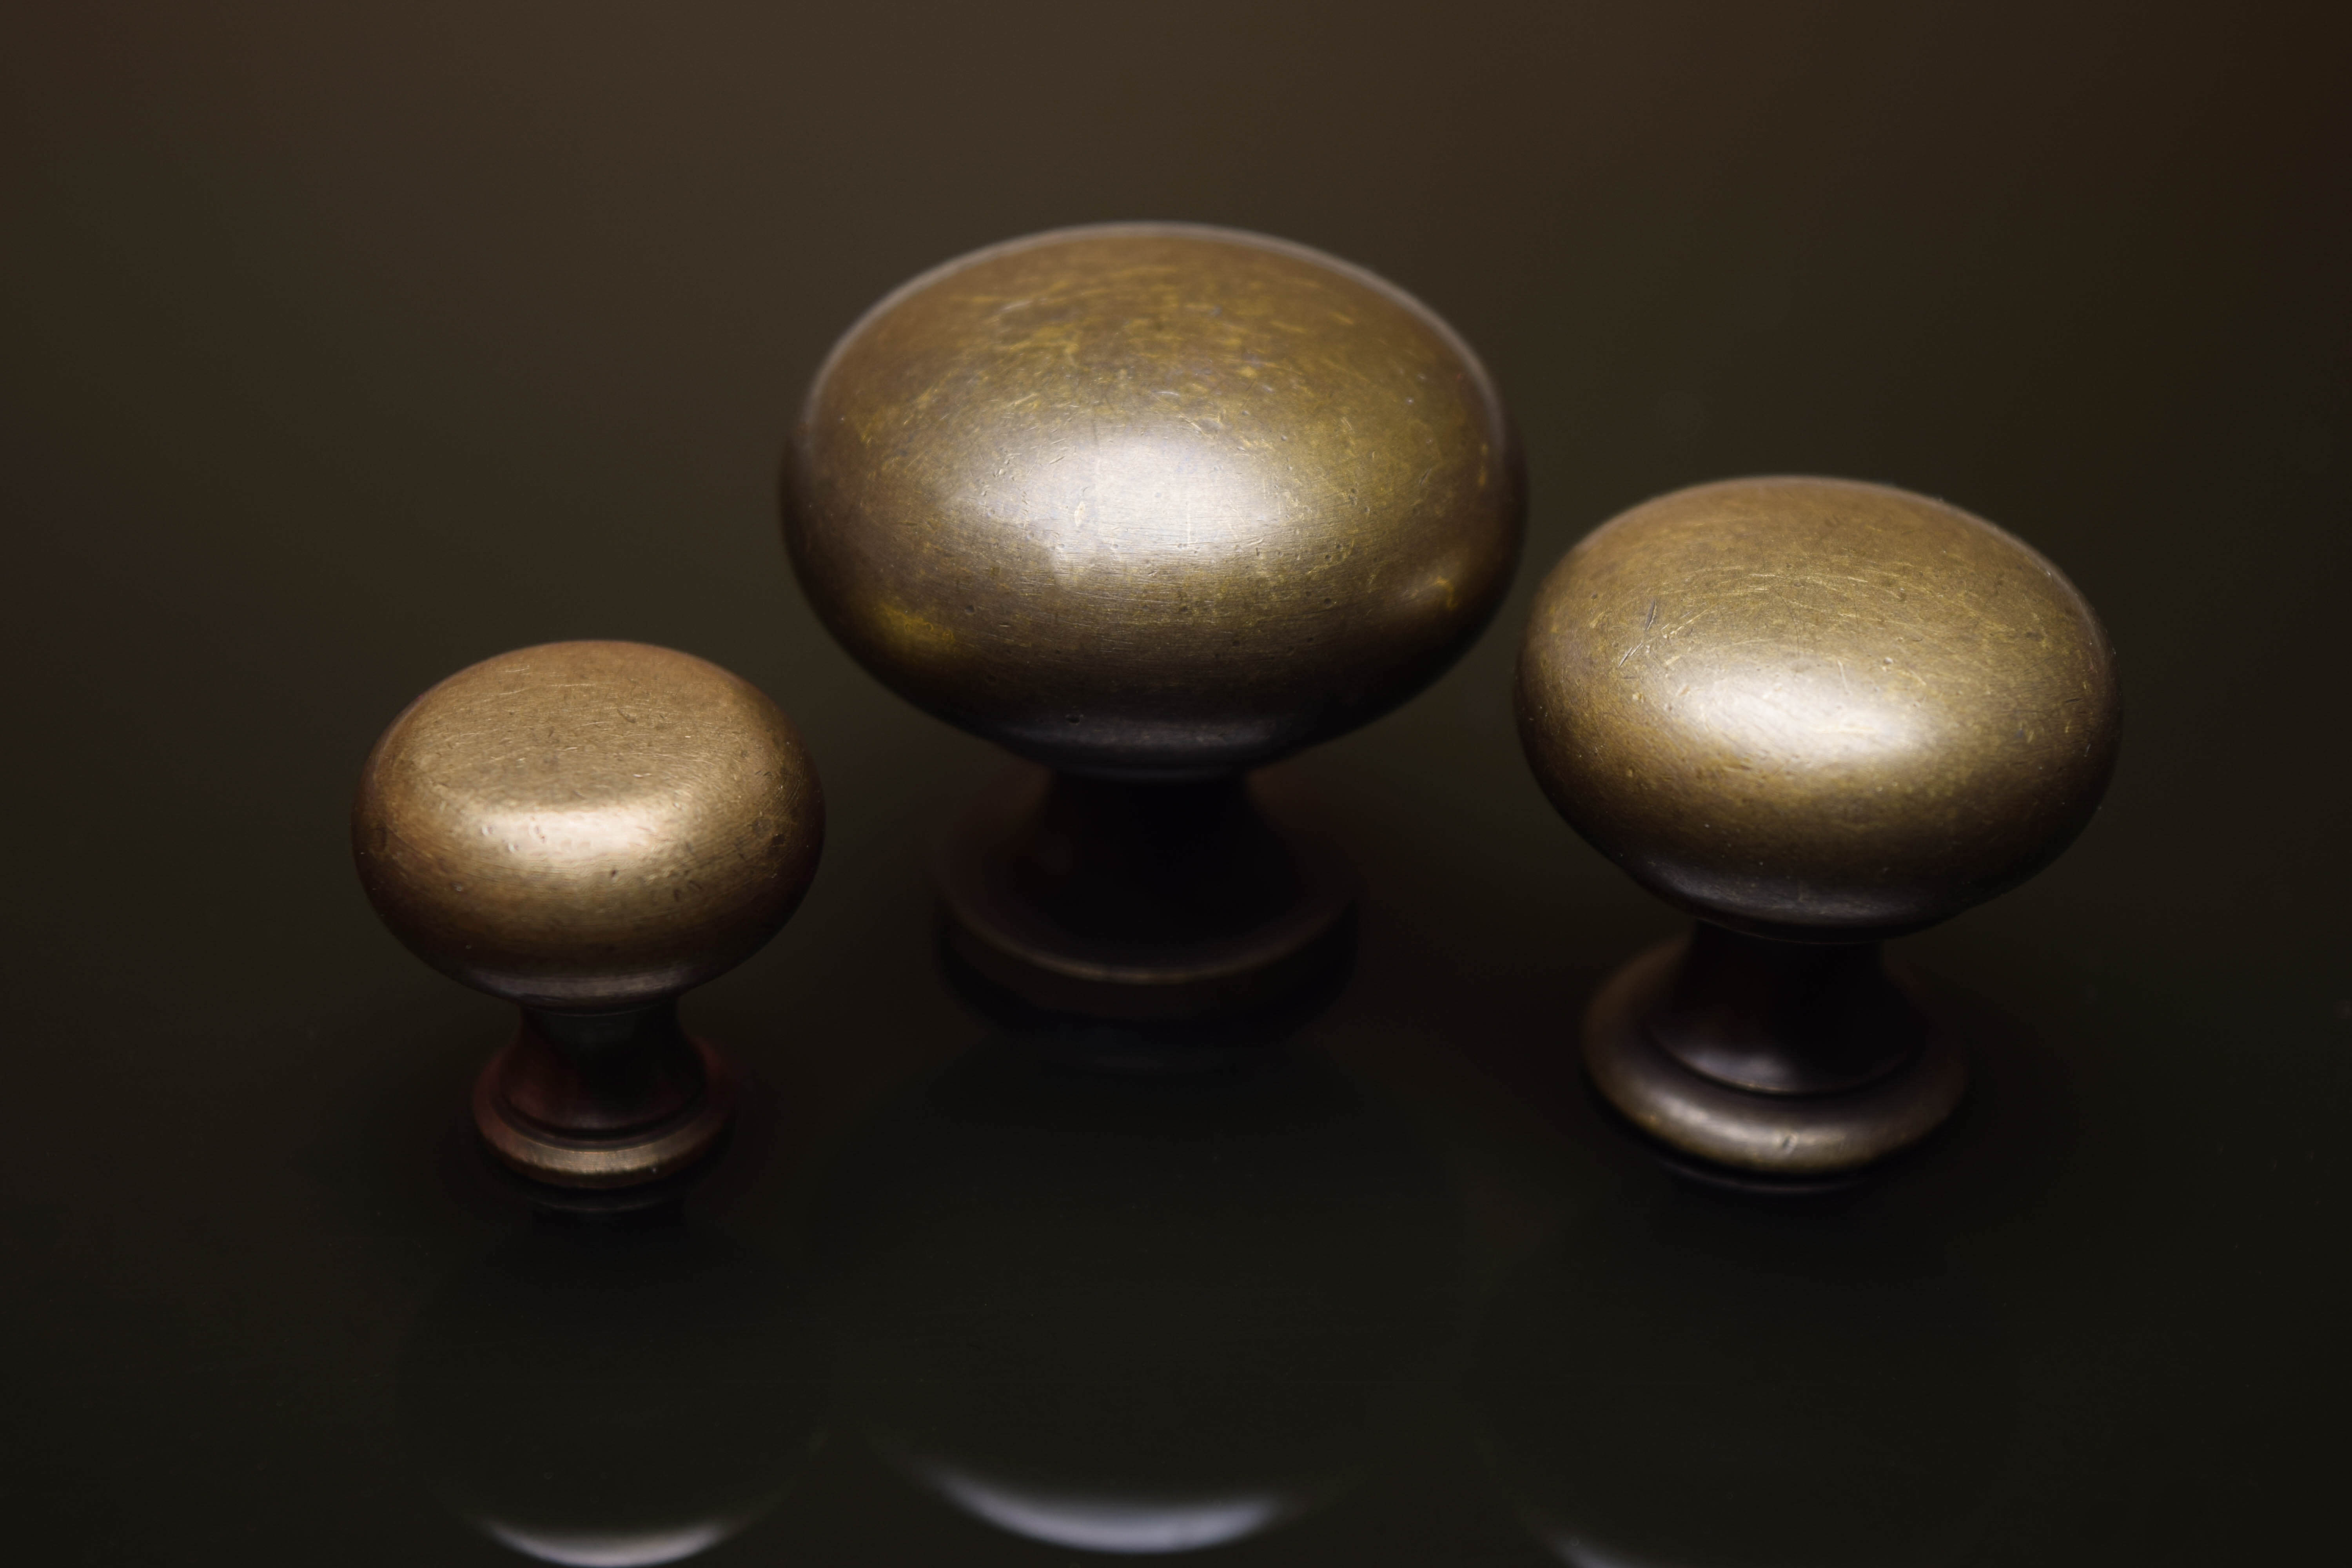 authentic solid brass knobs at Horton Brasses